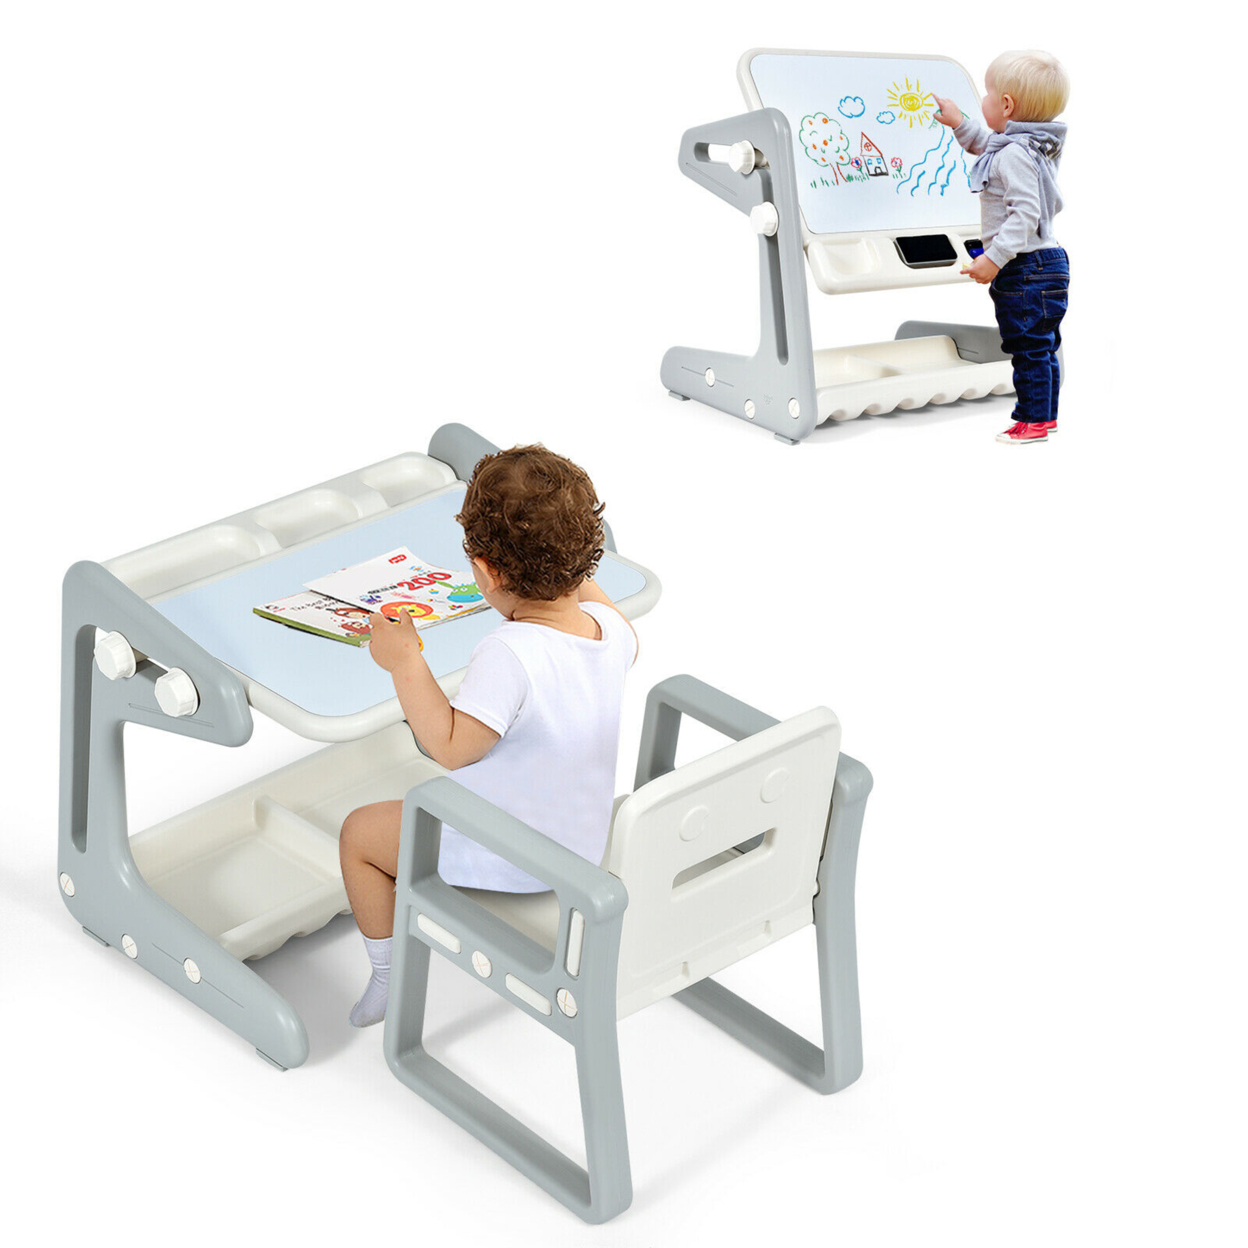 2 In 1 Kids Easel Table & Chair Set Adjustable Art Painting Board Gray/Blue/Light Pink - Blue